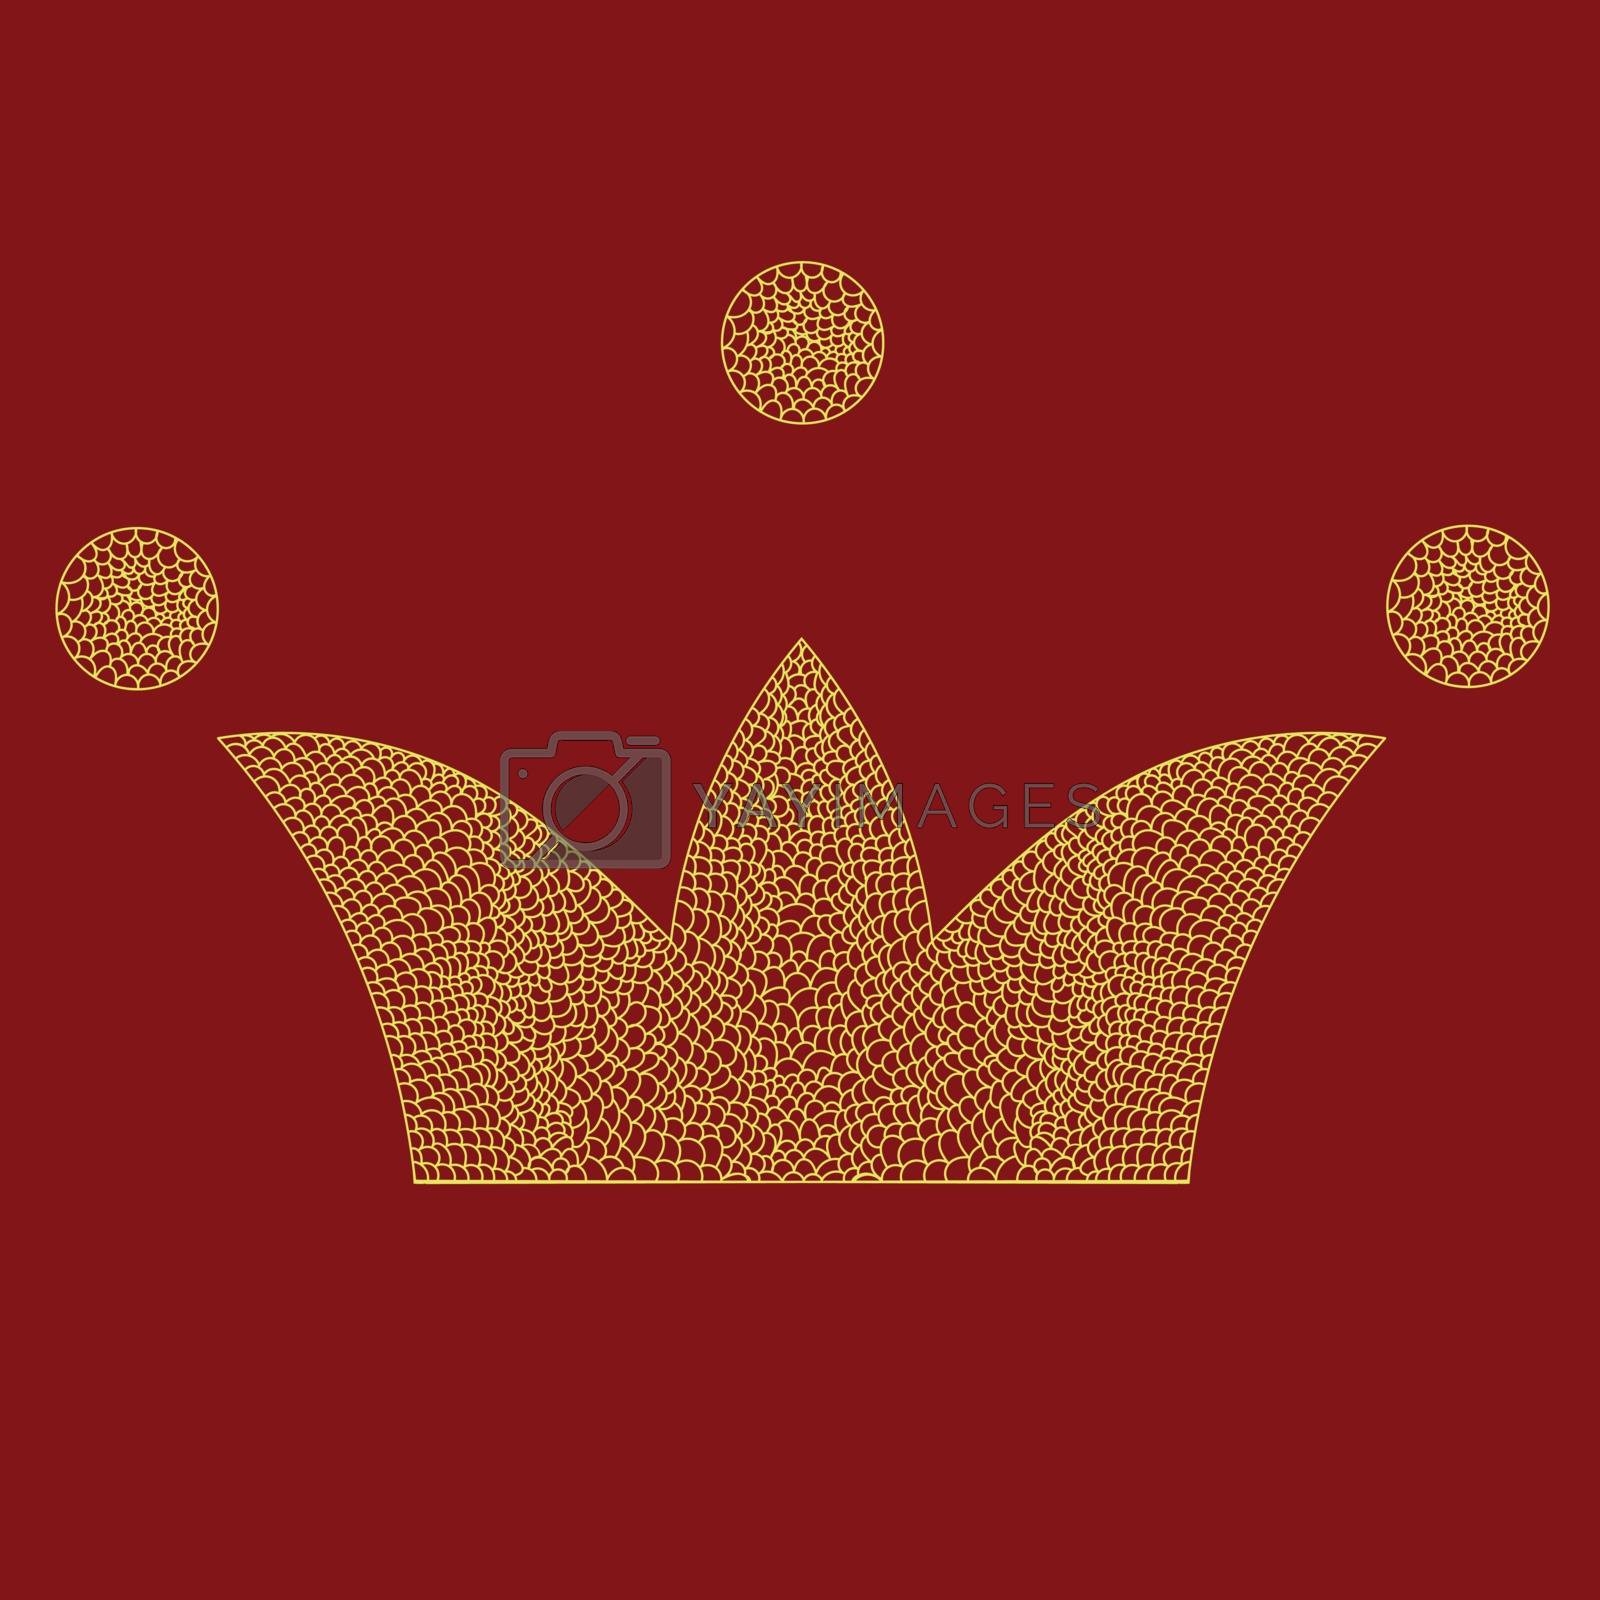 Royalty free image of Vector lace crown, art royal symbol. Imperial theme classic design element. by taklya